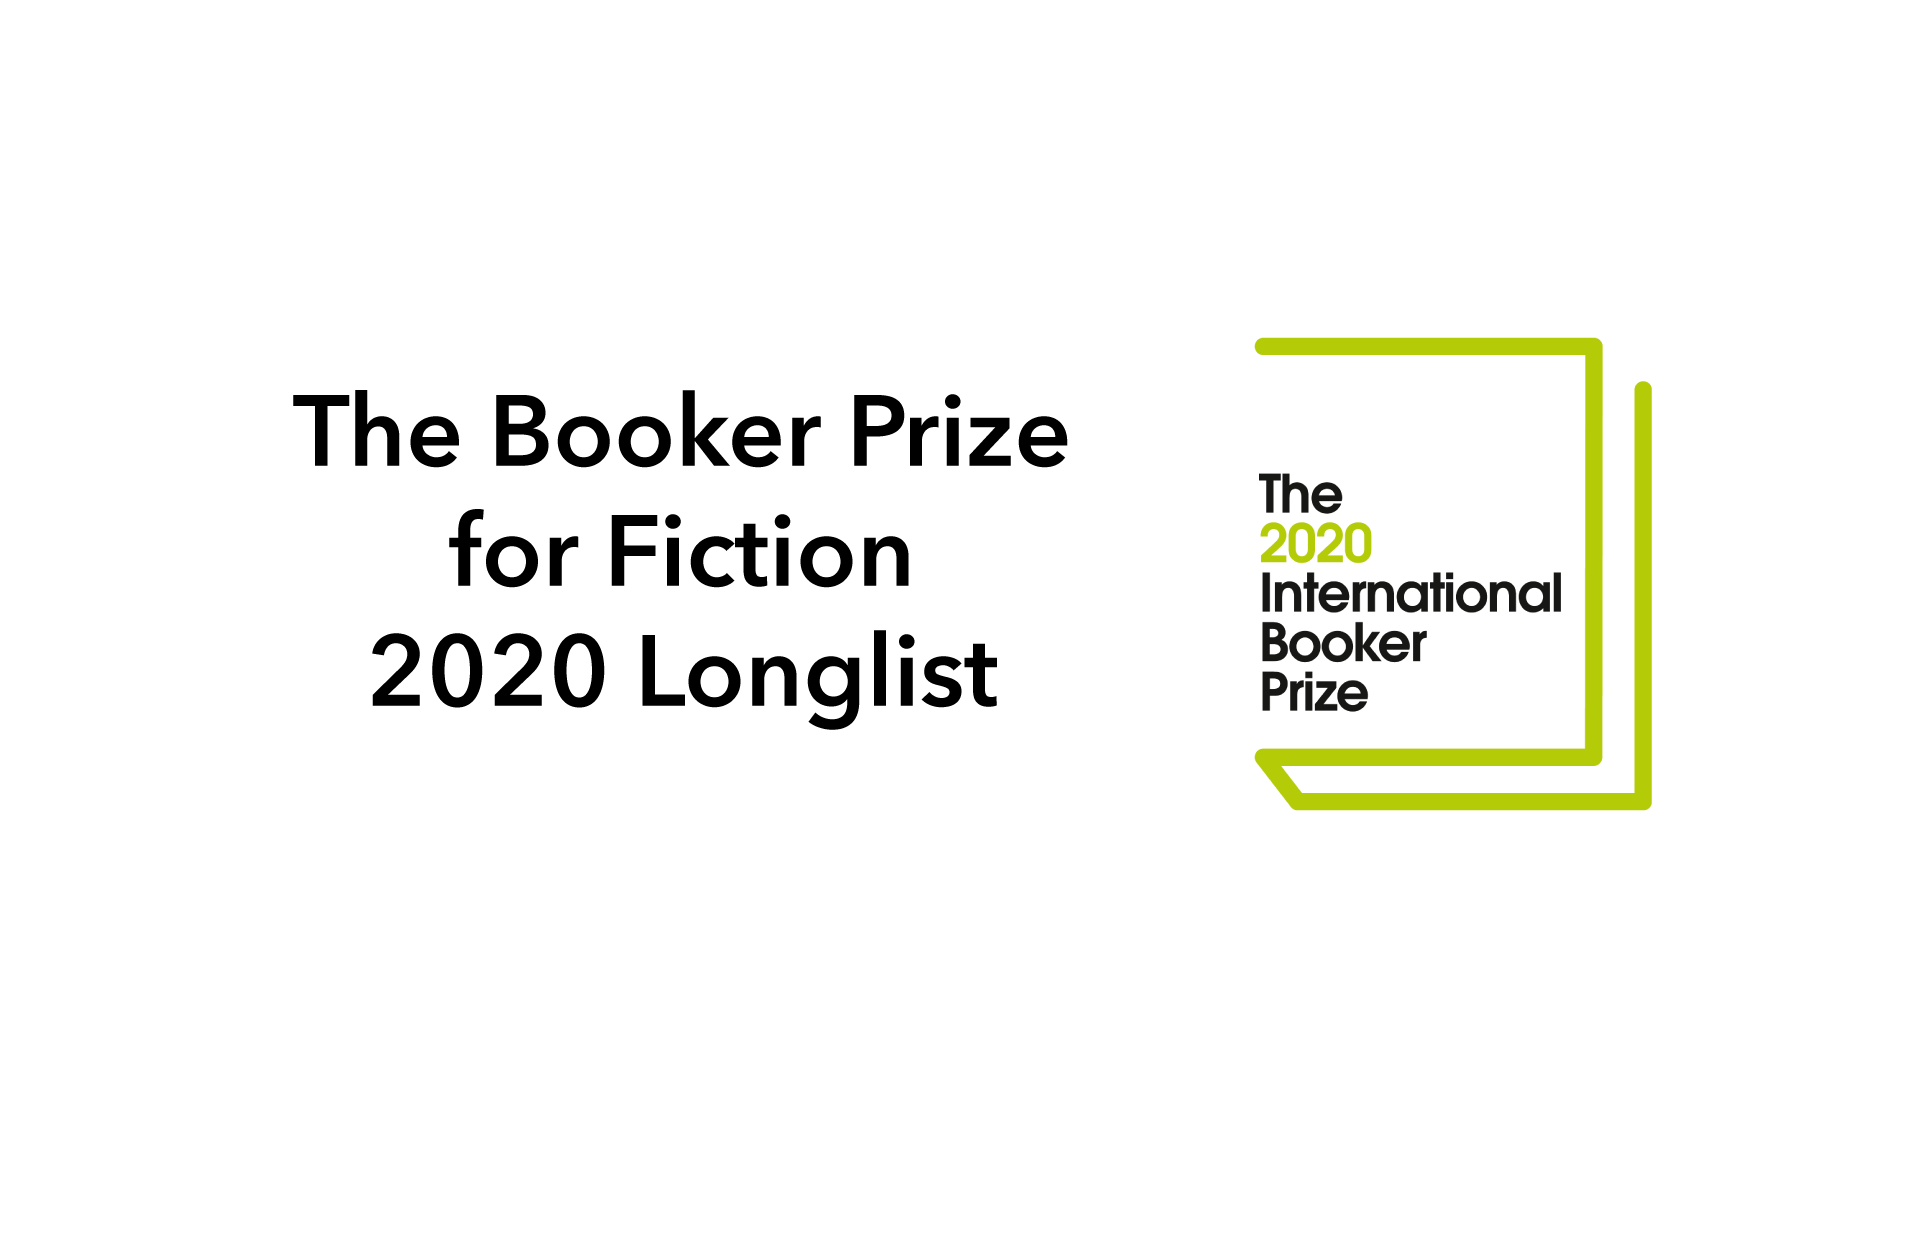 Booker Prize for Fiction 2020 longlist